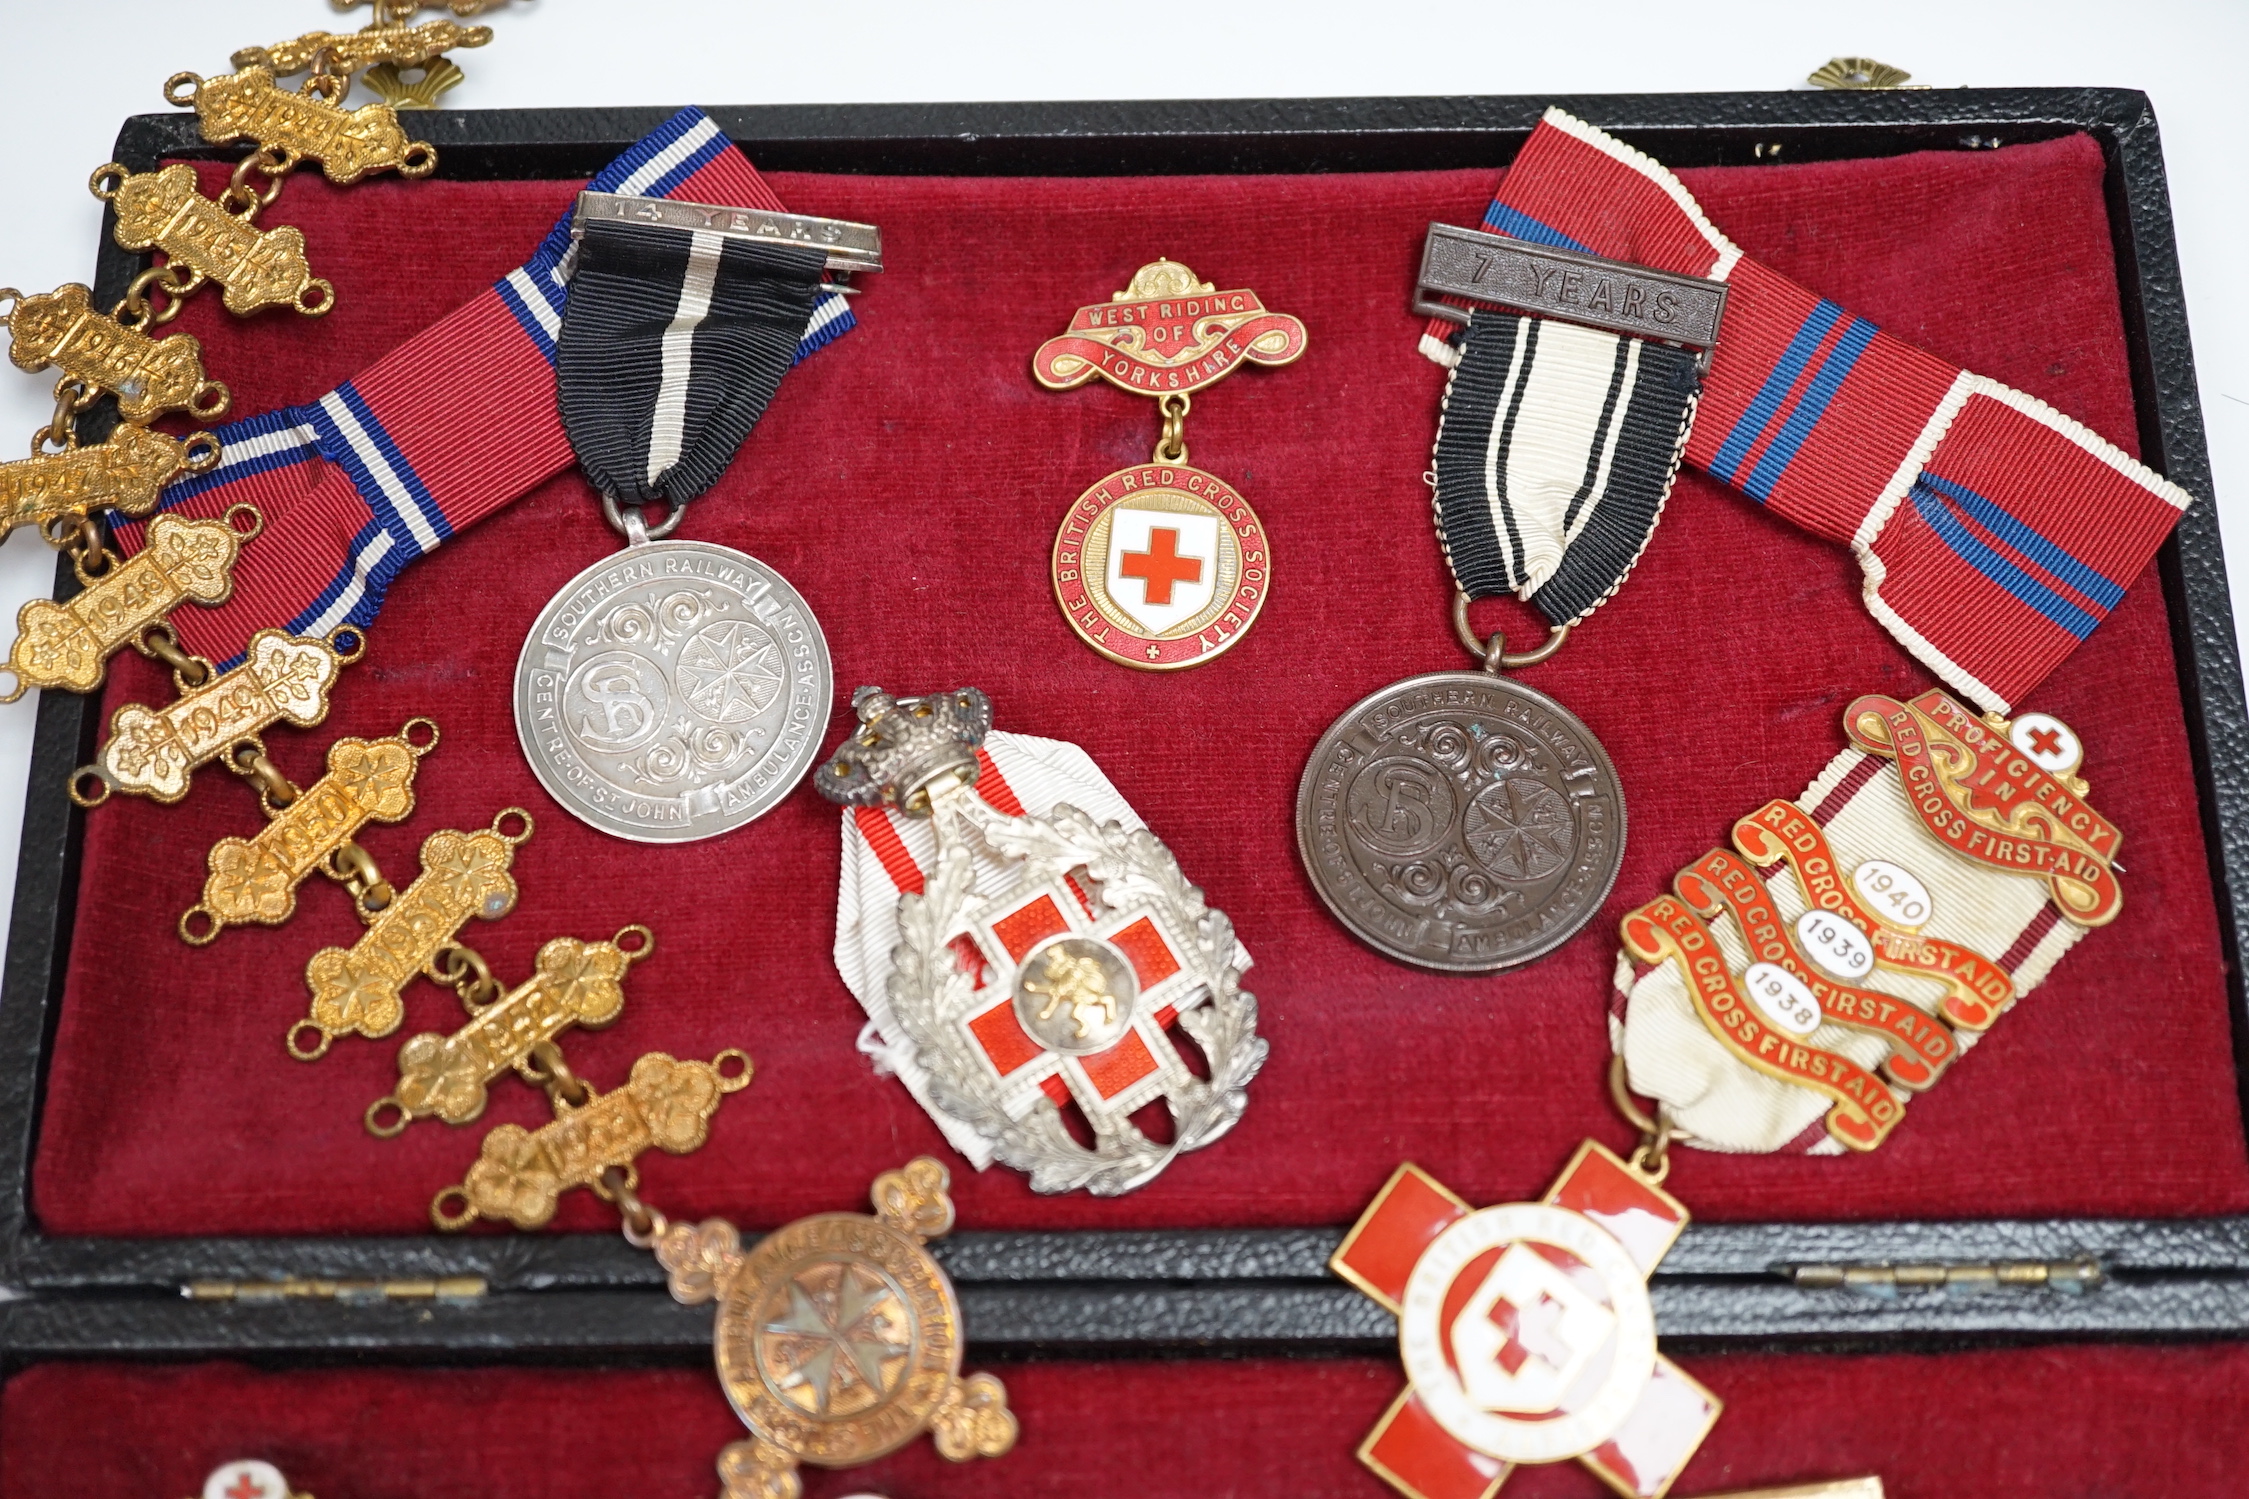 A collection of British Red Cross, etc. medals, awards and memorabilia including medals in - Image 2 of 7